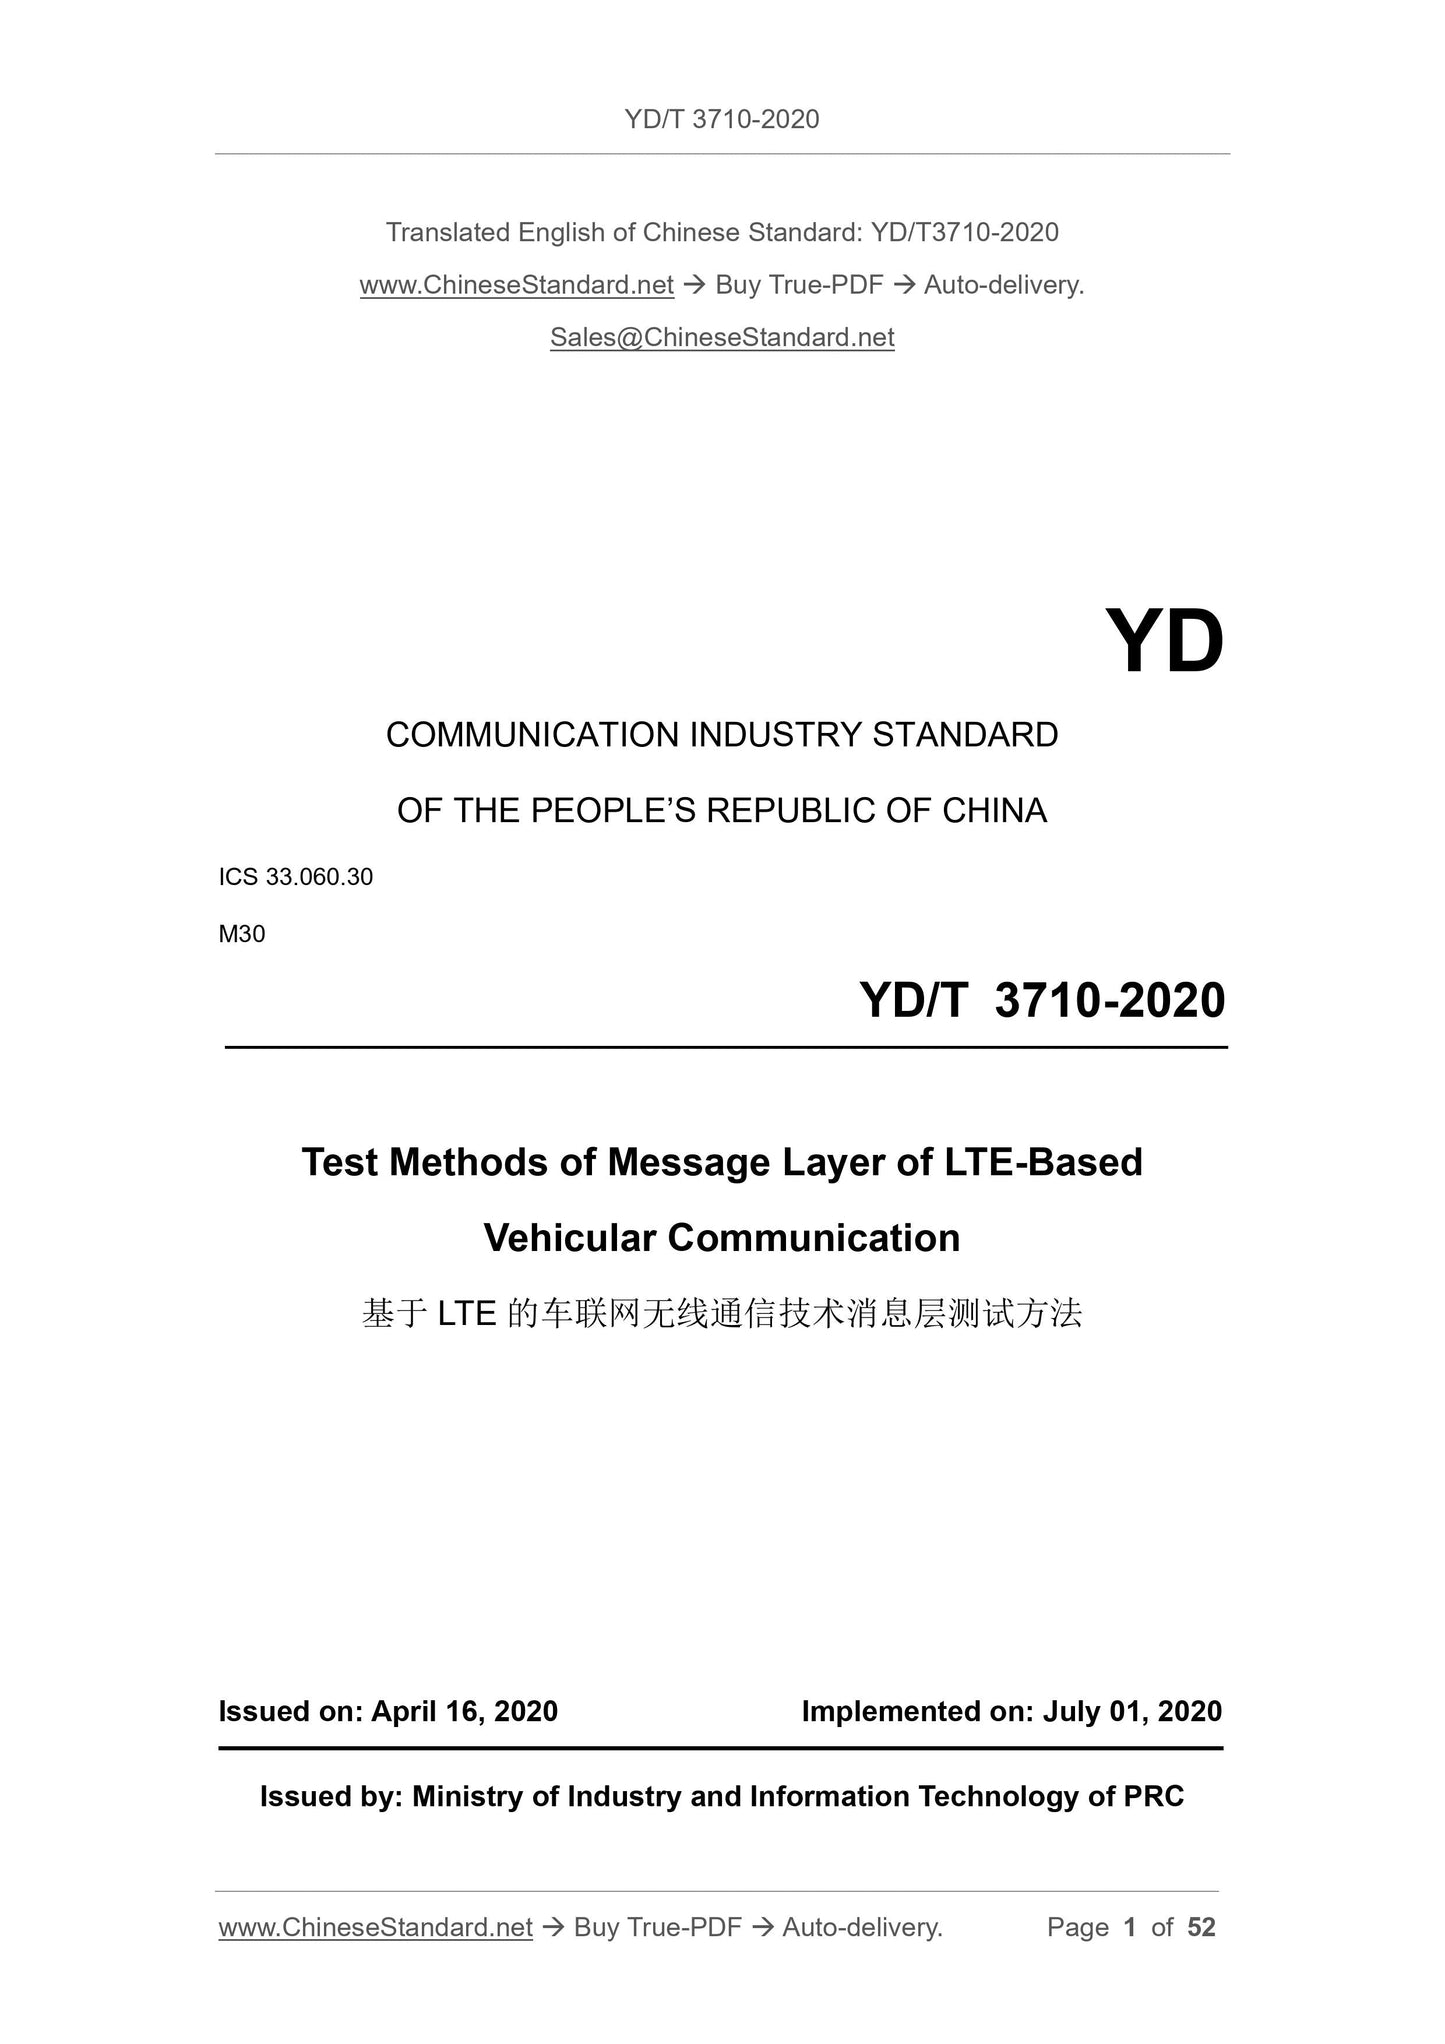 YD/T 3710-2020 Page 1